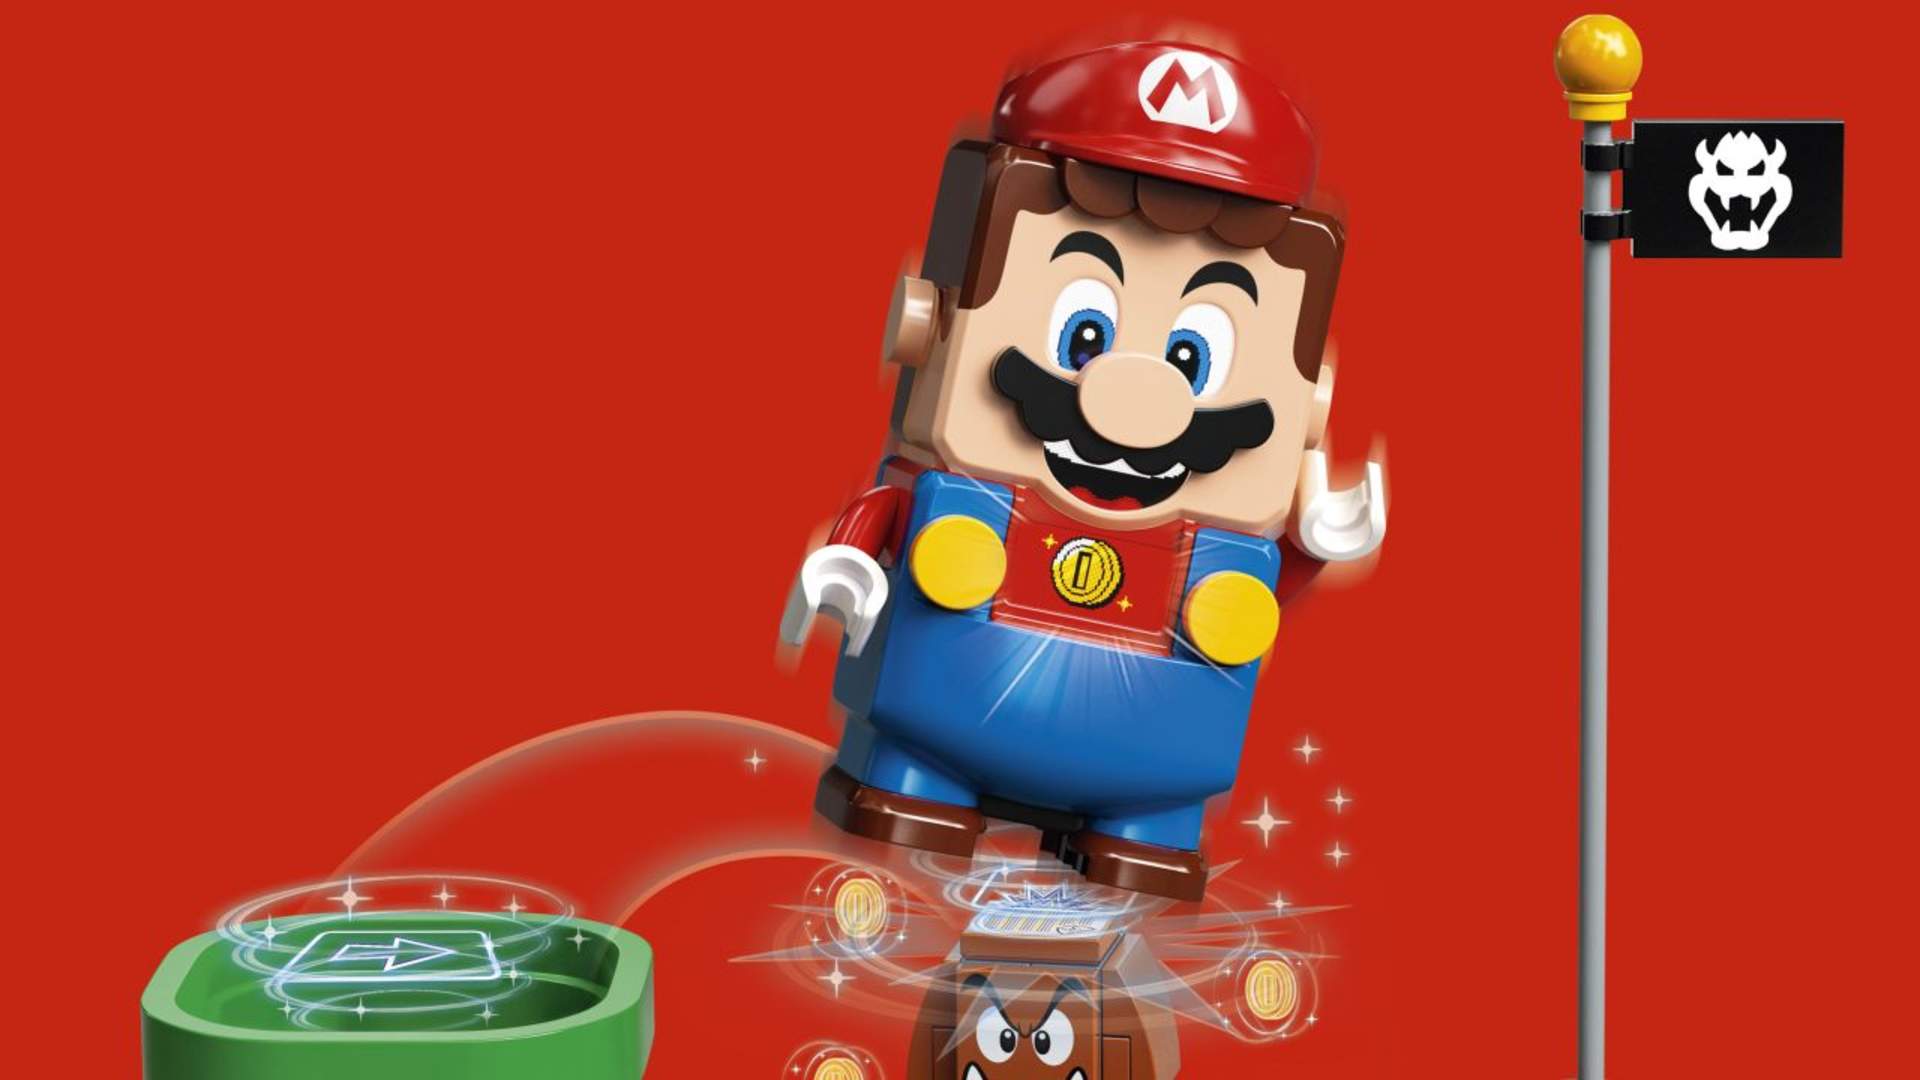 Lego Super Mario Brings the Plumber to Life With Lego Bricks